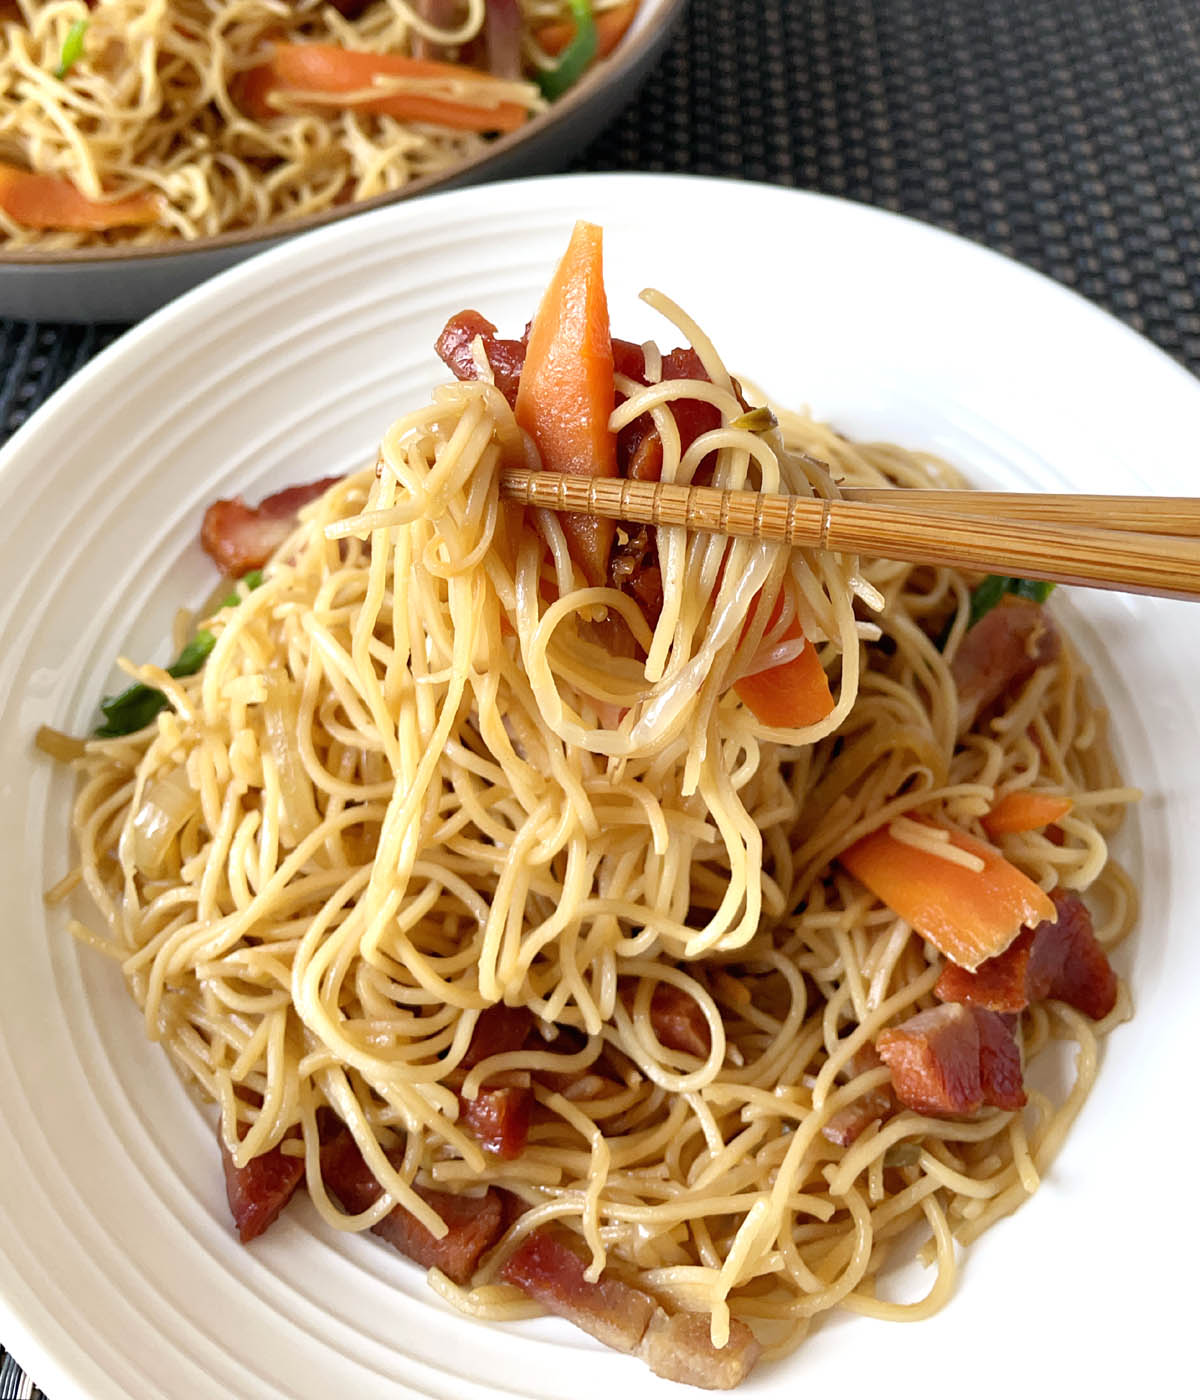 A pair of wooden chopsticks holding up  noodles, carrots and meat over a white round dish.